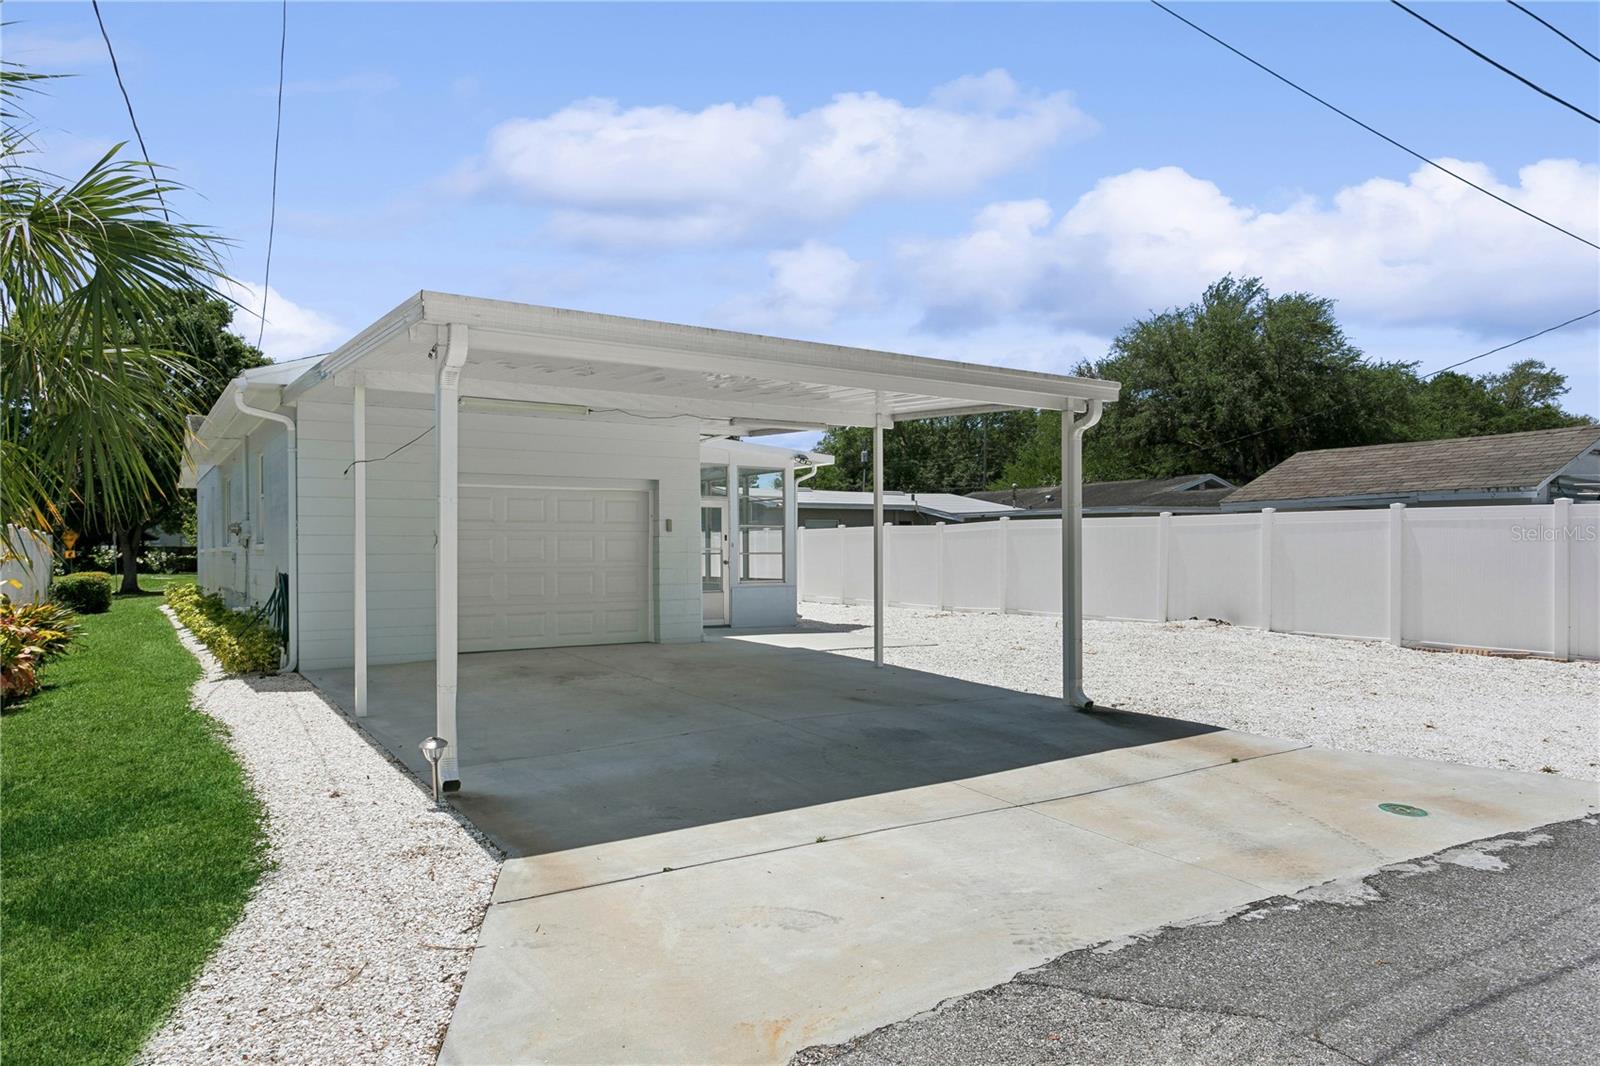 Carport/alley access and side yard